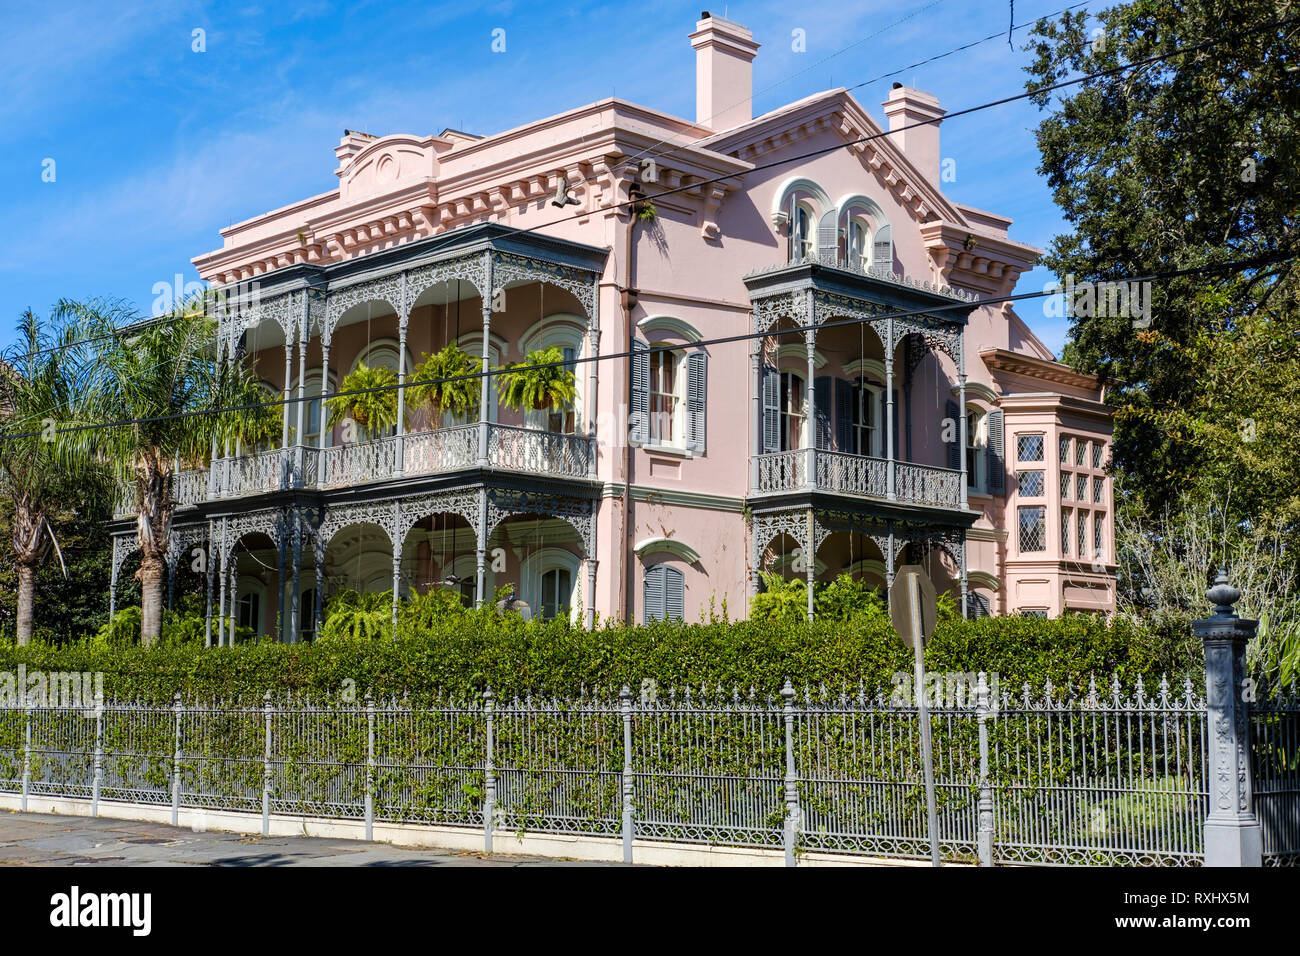 The ornate facade of Carroll-Crawford House, three-story Italianate house, cast-iron balconies and fence, Garden District, NOLA, New Orleans, USA. Stock Photo